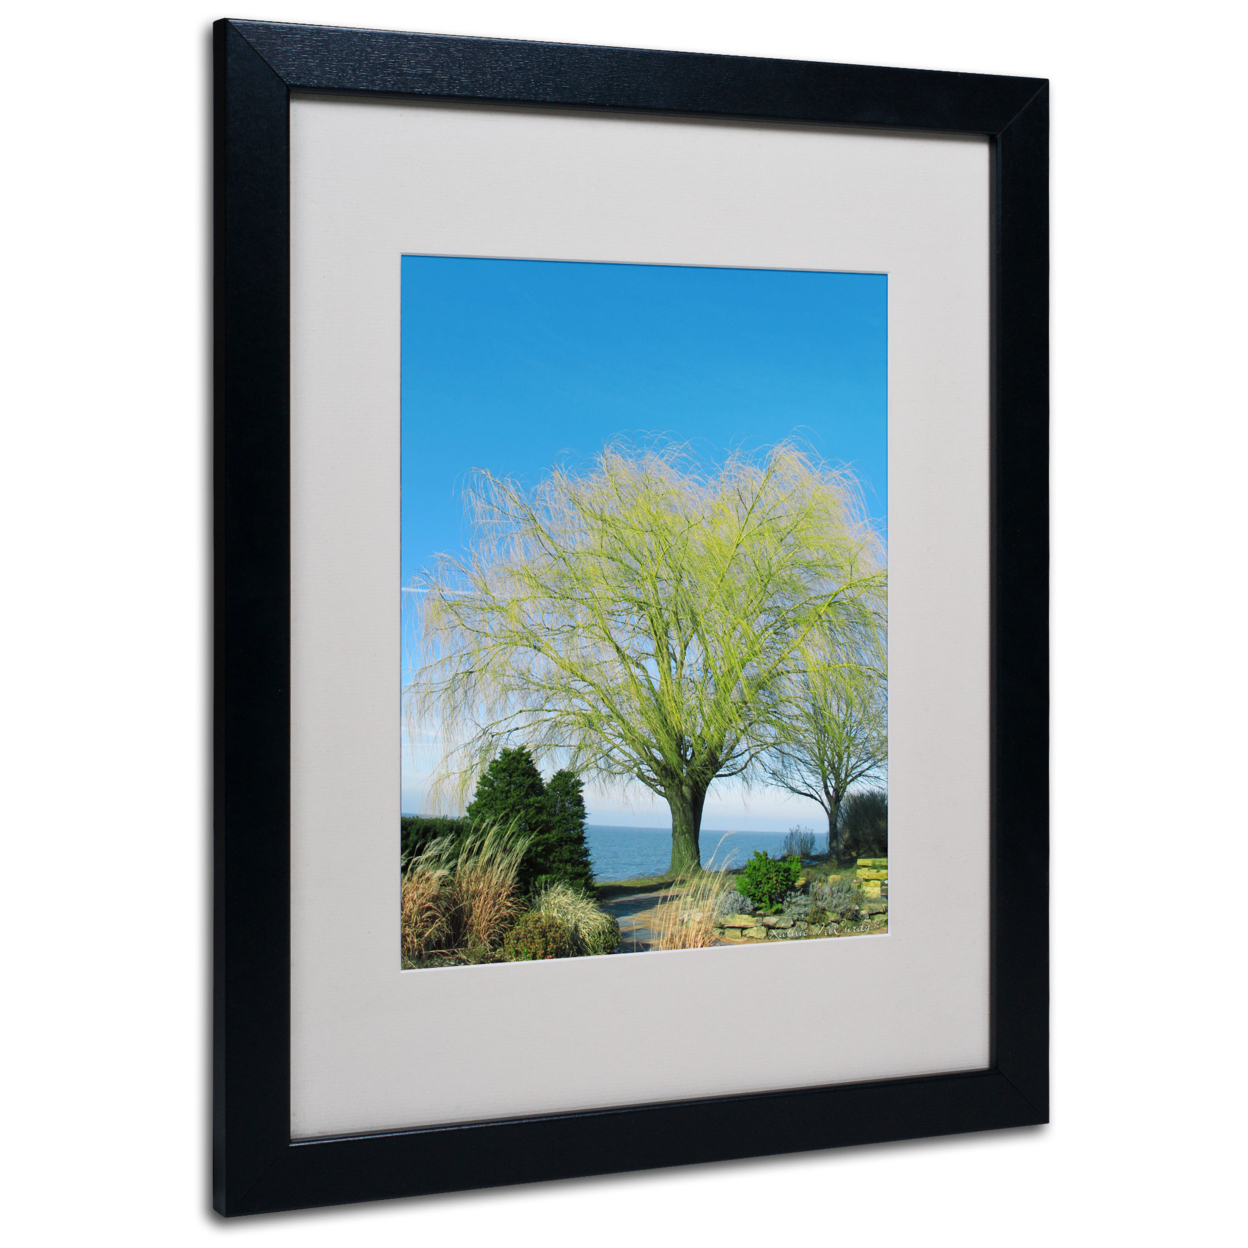 Kathie McCurdy 'Wind In The Willow' Black Wooden Framed Art 18 X 22 Inches